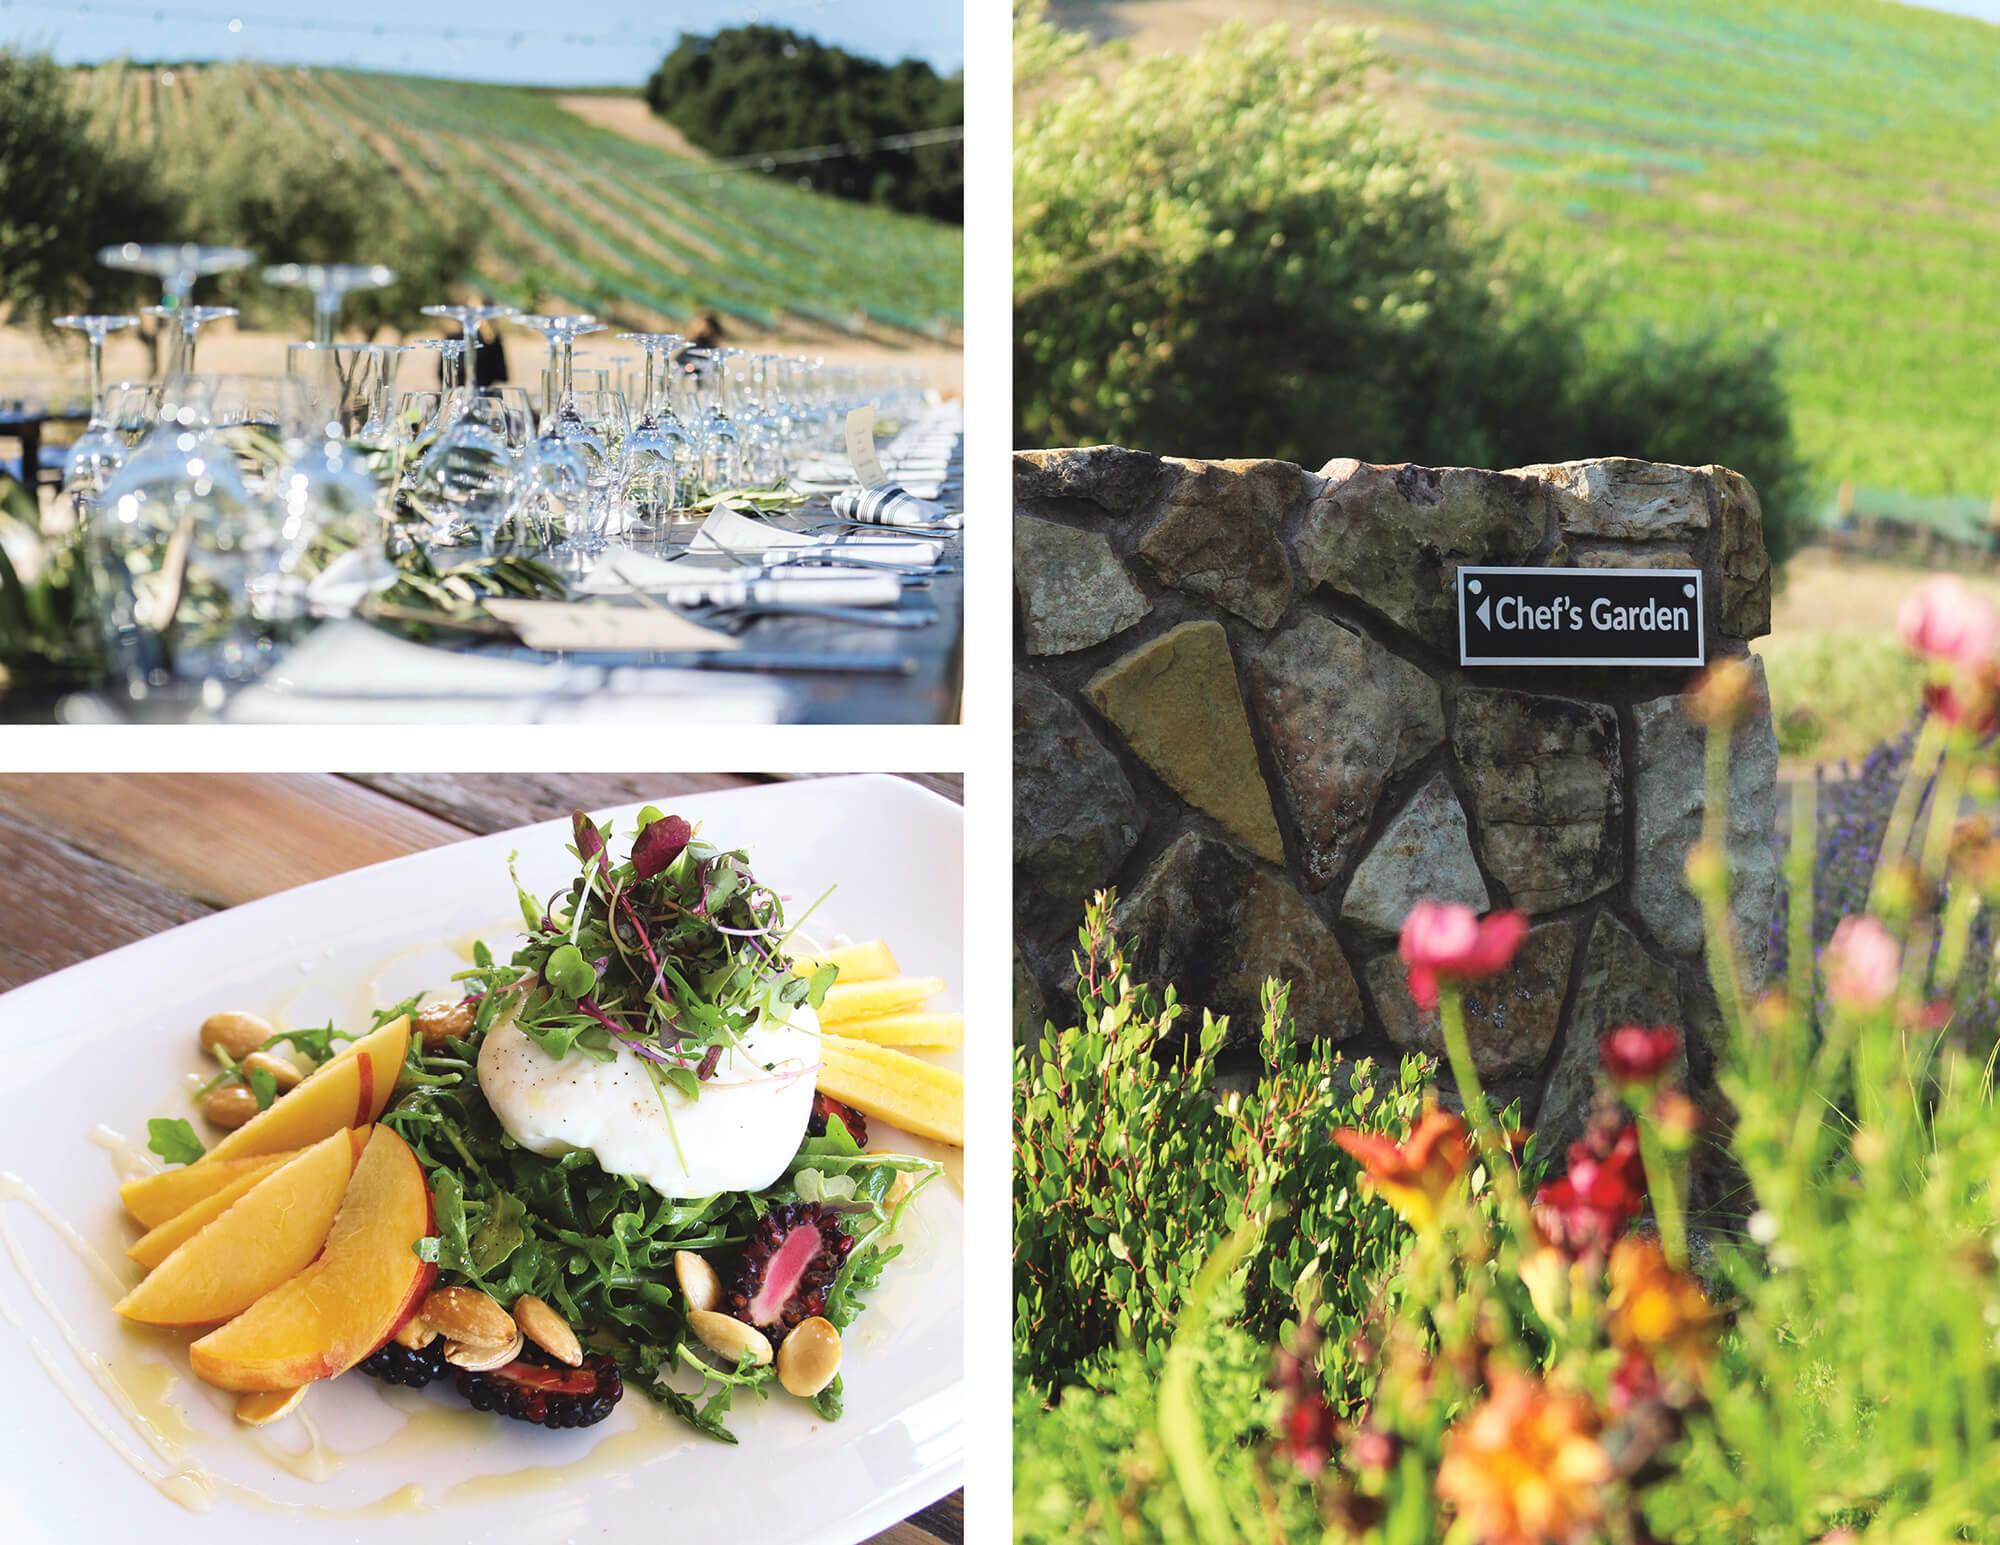 From Left: a table set for a wedding in front of heart hill; a sign for our Chef's Garden; a nectarine salad